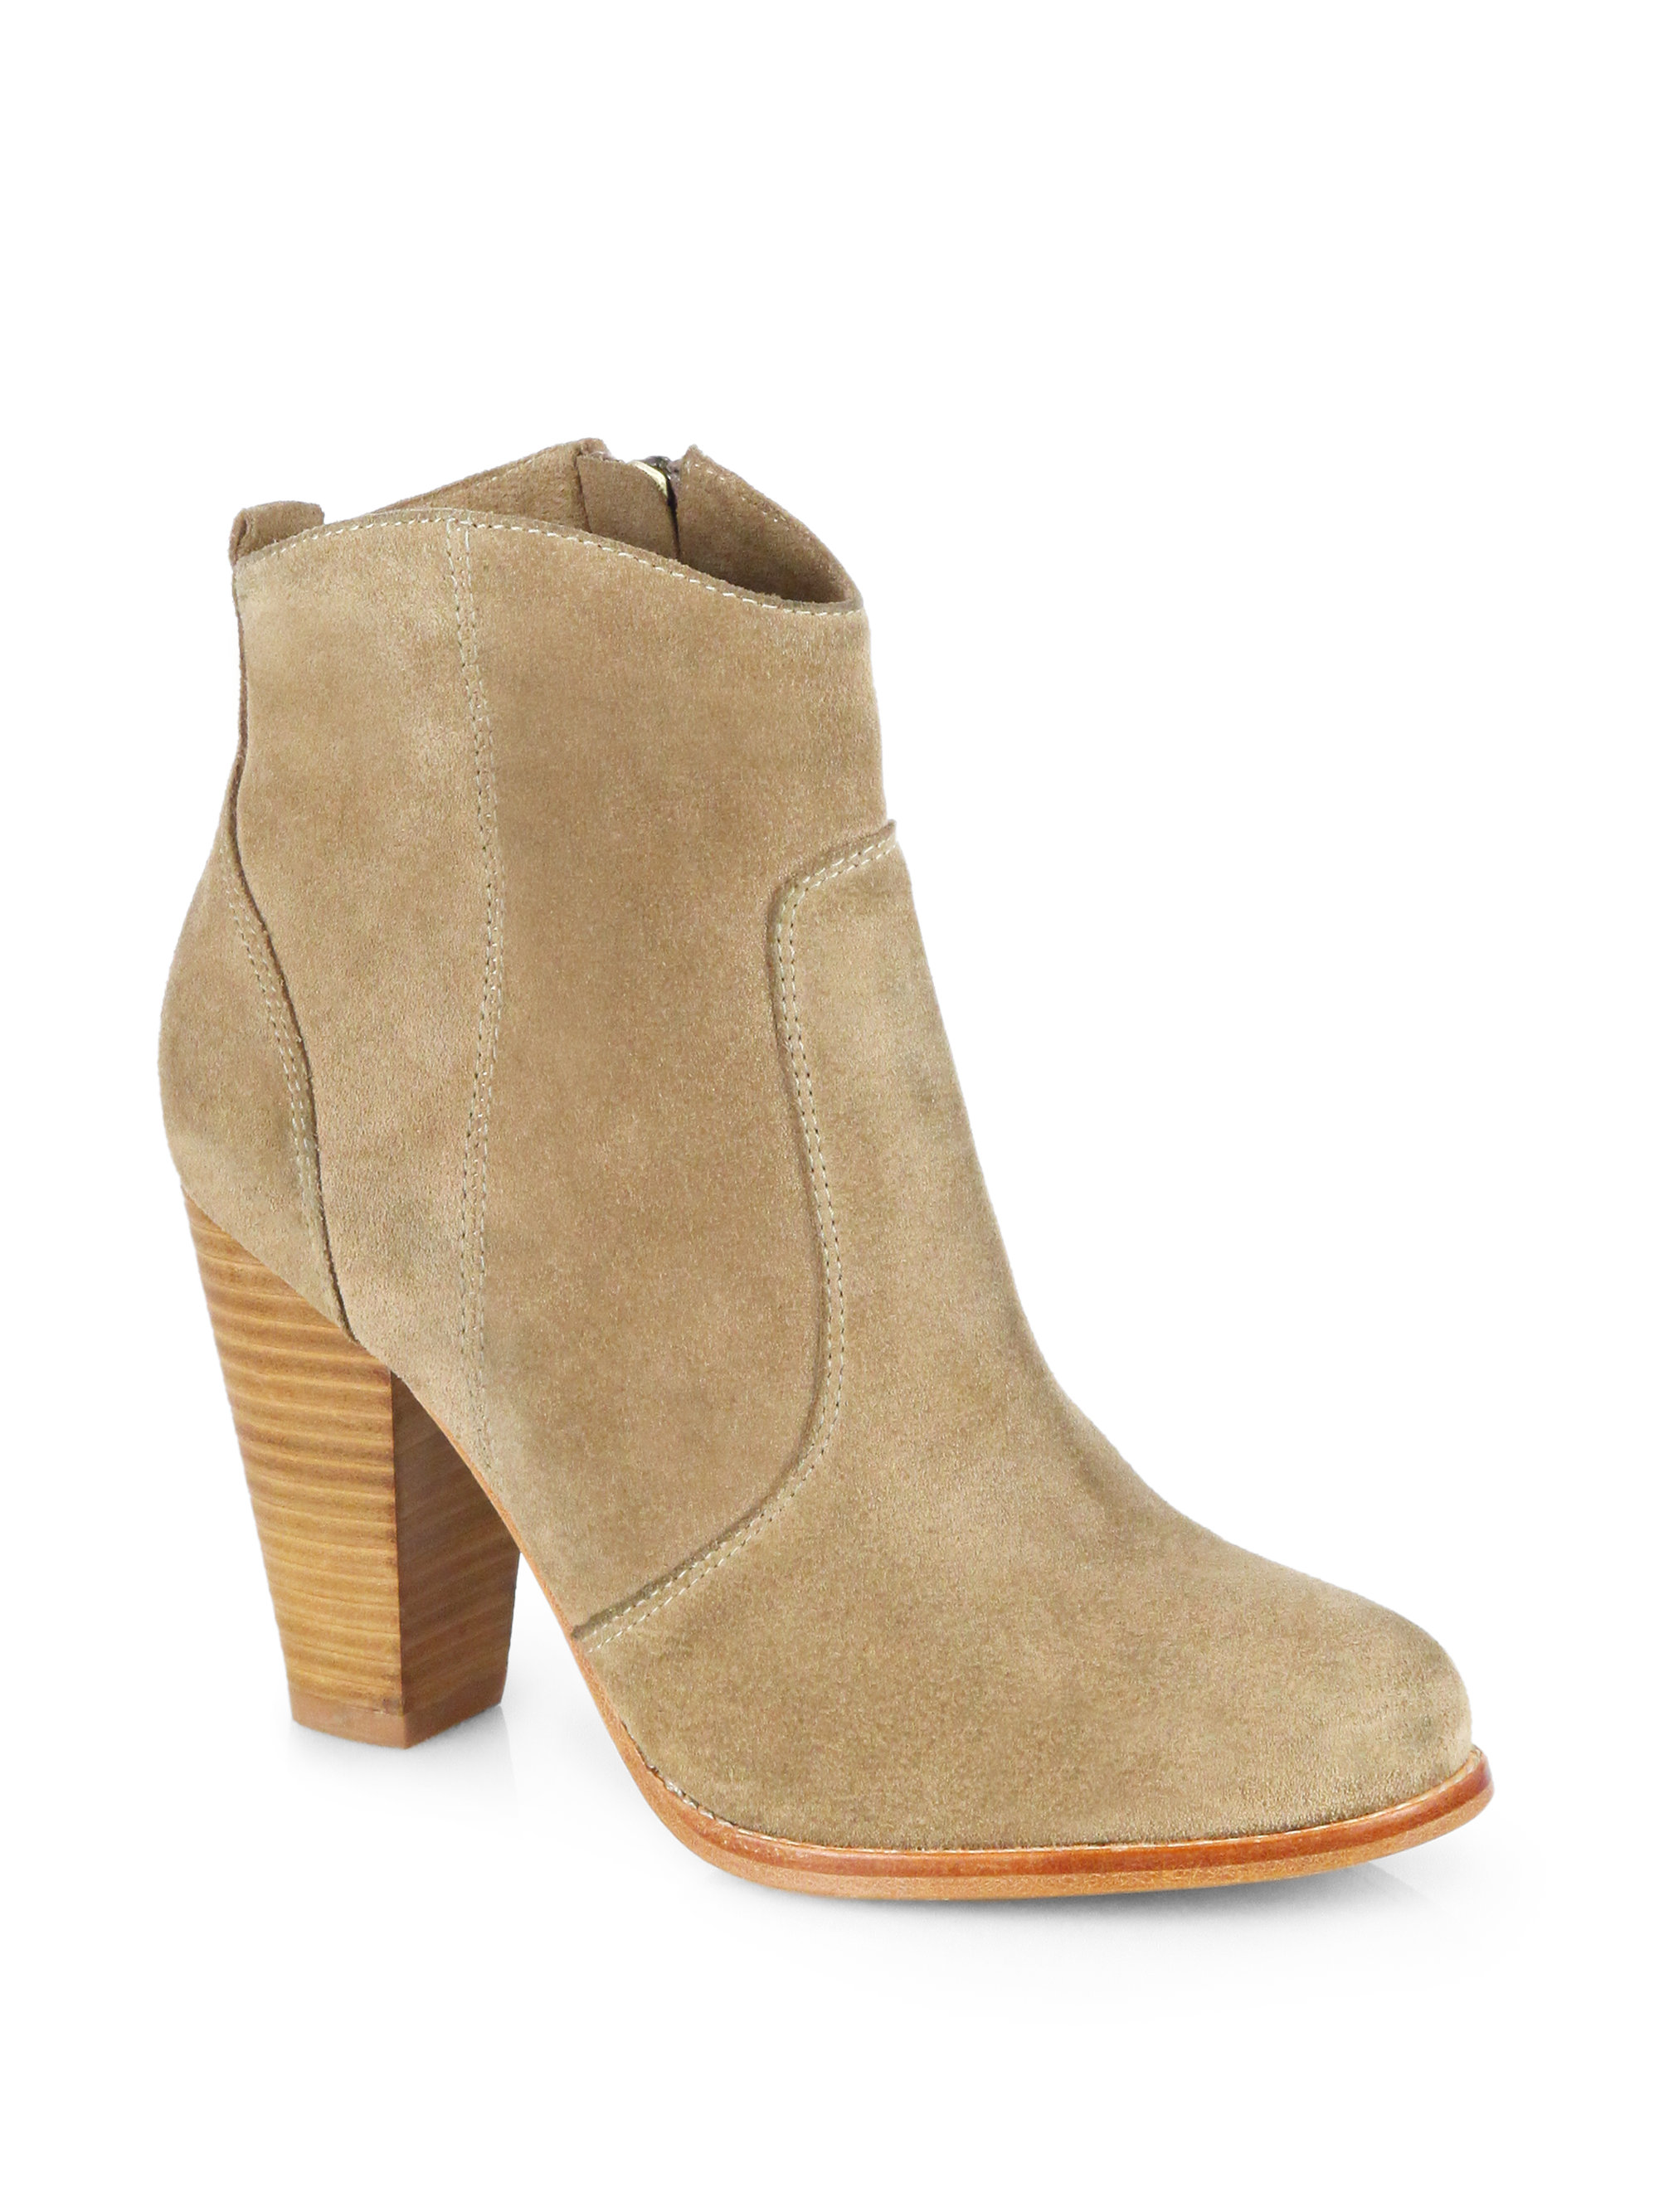 Joie Dalton Suede Ankle Boots in Brown (CEMENT) | Lyst